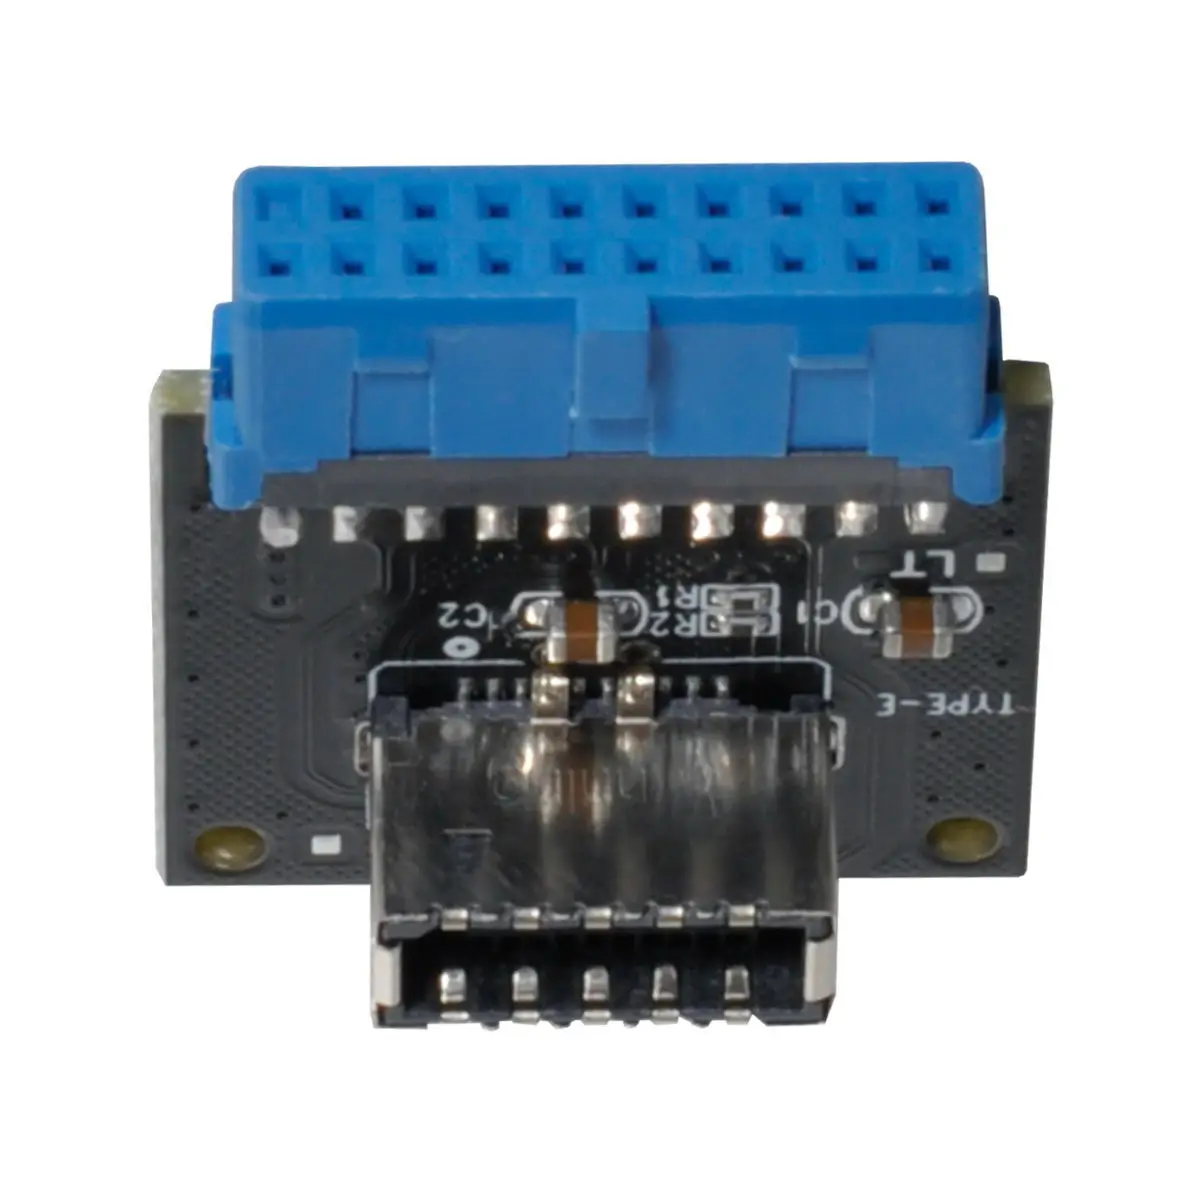 USB 3.1 Front Panel Socket Type-E to USB 3.0 20Pin Header Male Extension Adapter for Motherboard